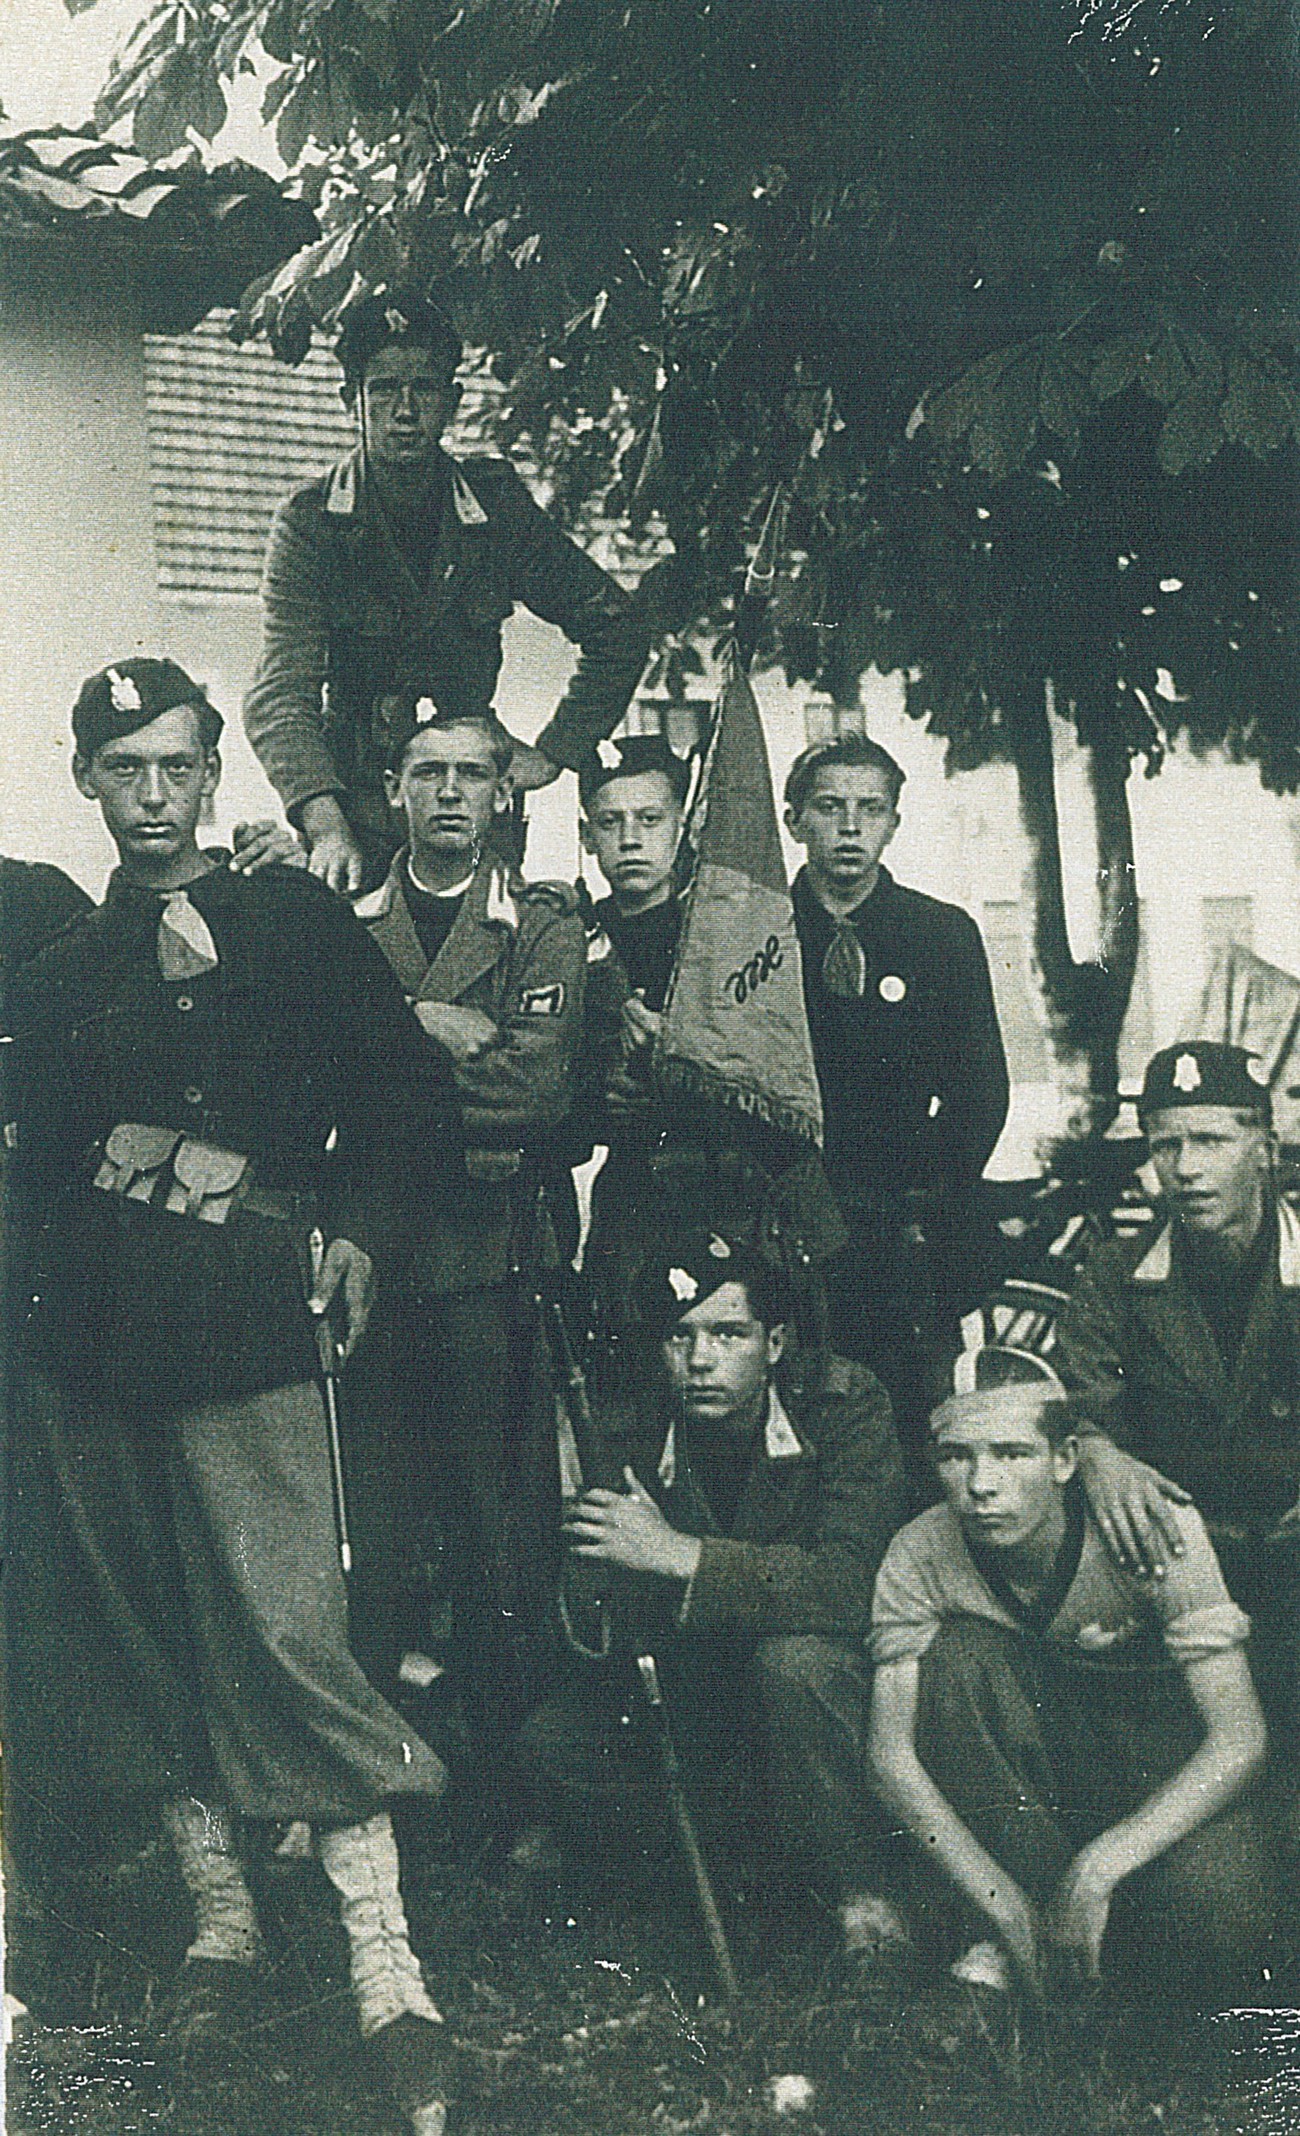 The Fascist regime placed great emphasis on the upbringing of youth in the spirit of militarism. In the photograph, we can see a group of young from Idrija, who were members of the Fascist youth organisation. Private archive of Slavko Moravec, Idrija War Museum.